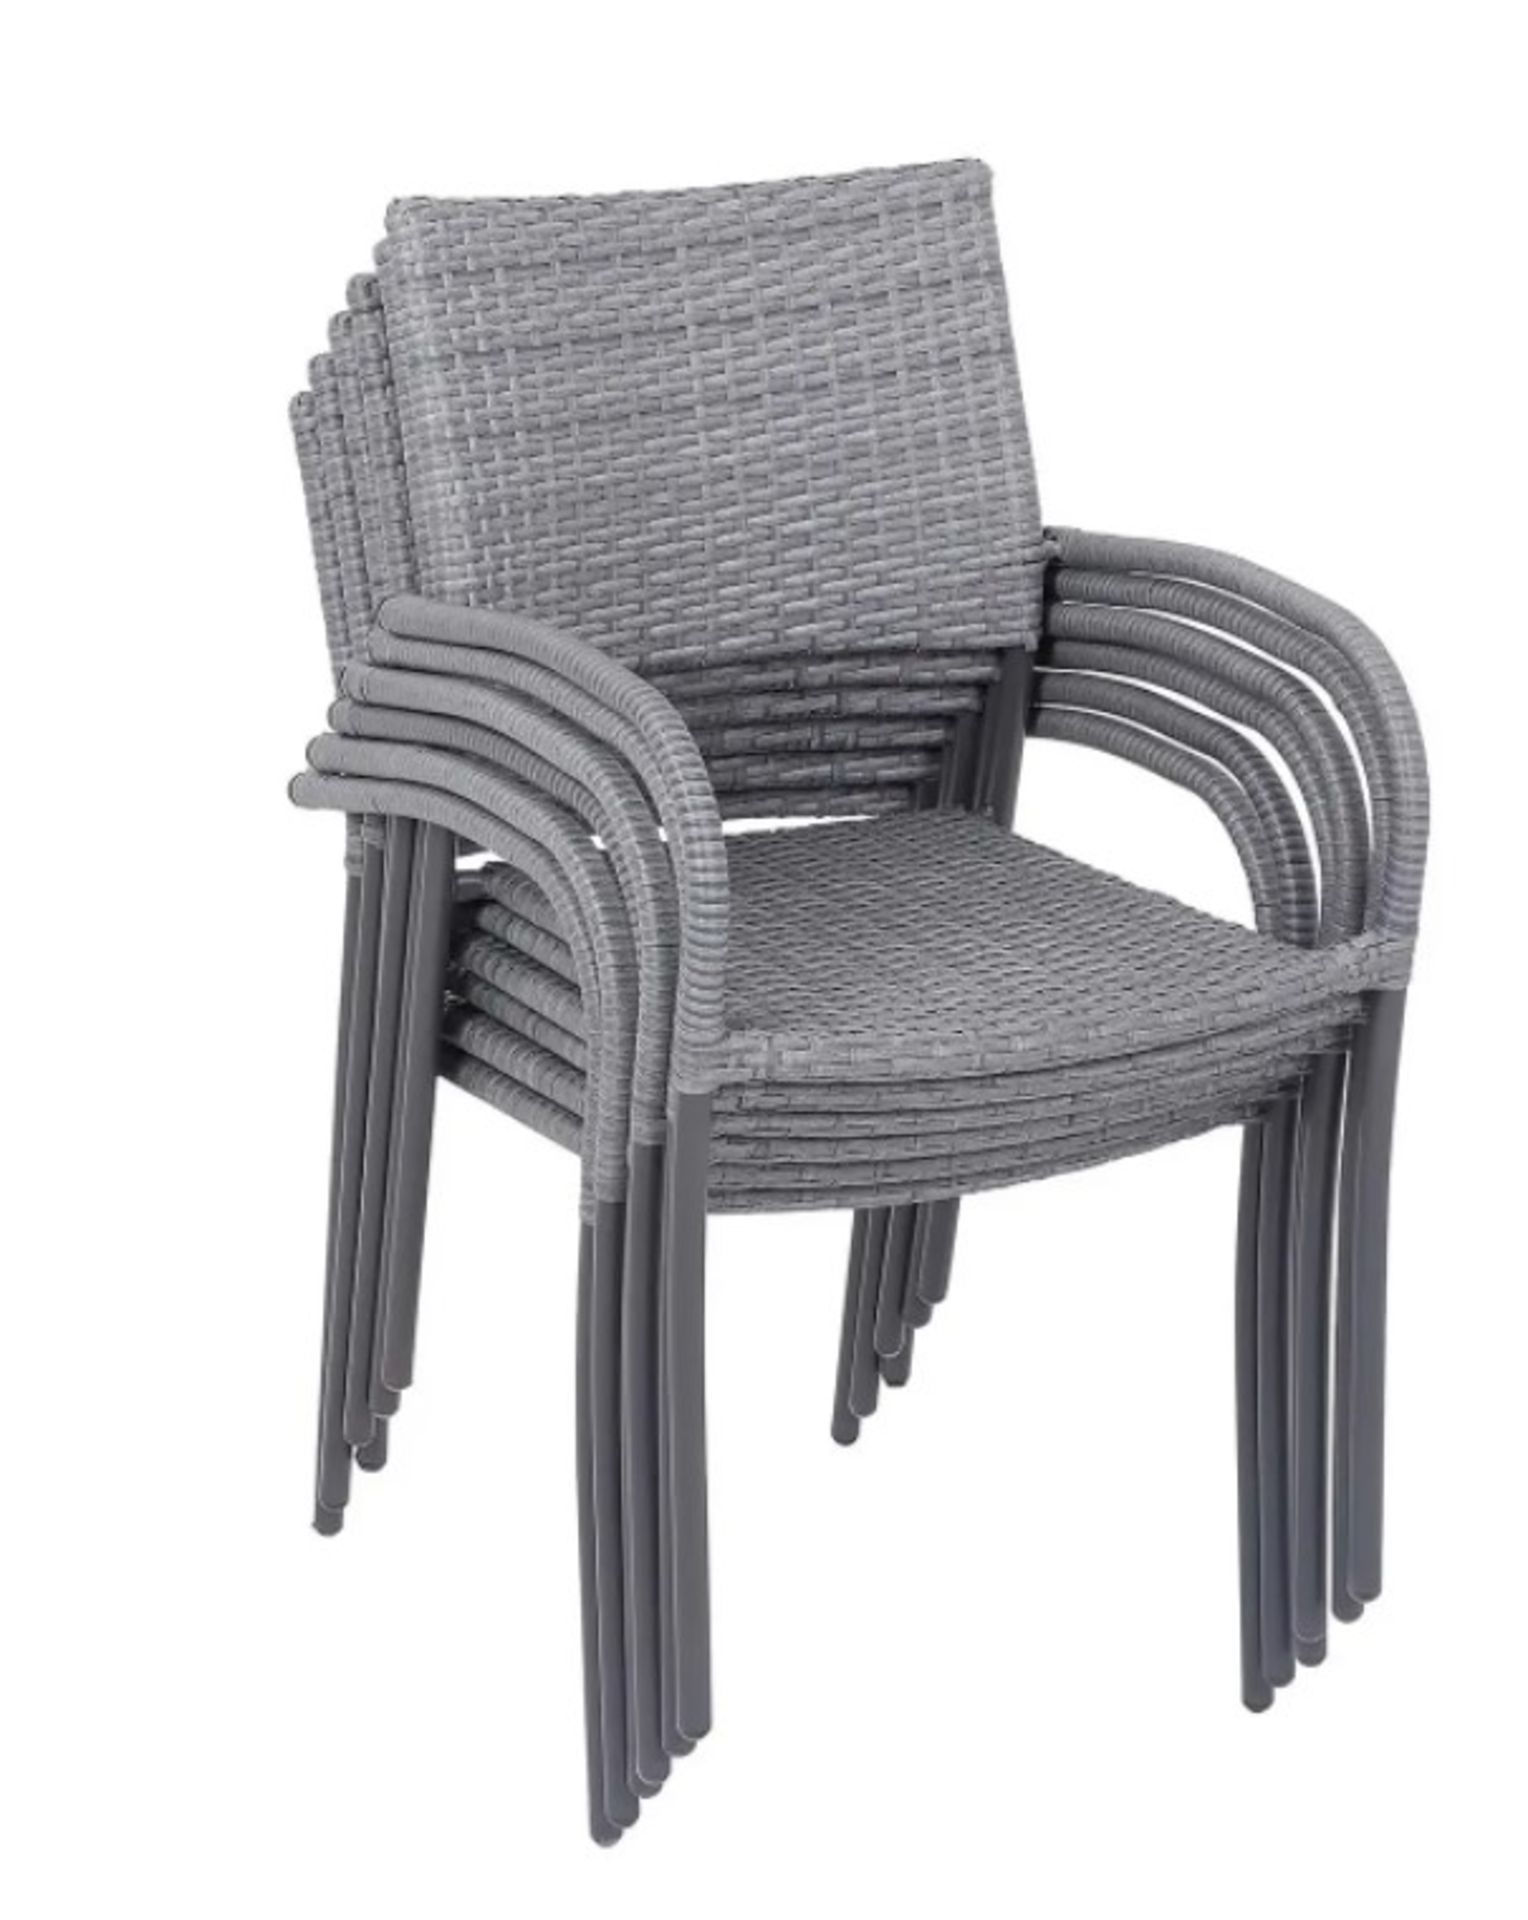 (57/5E) 7x Bambrick Stacking Chair Grey. (All Units Appears As New). - Image 2 of 4